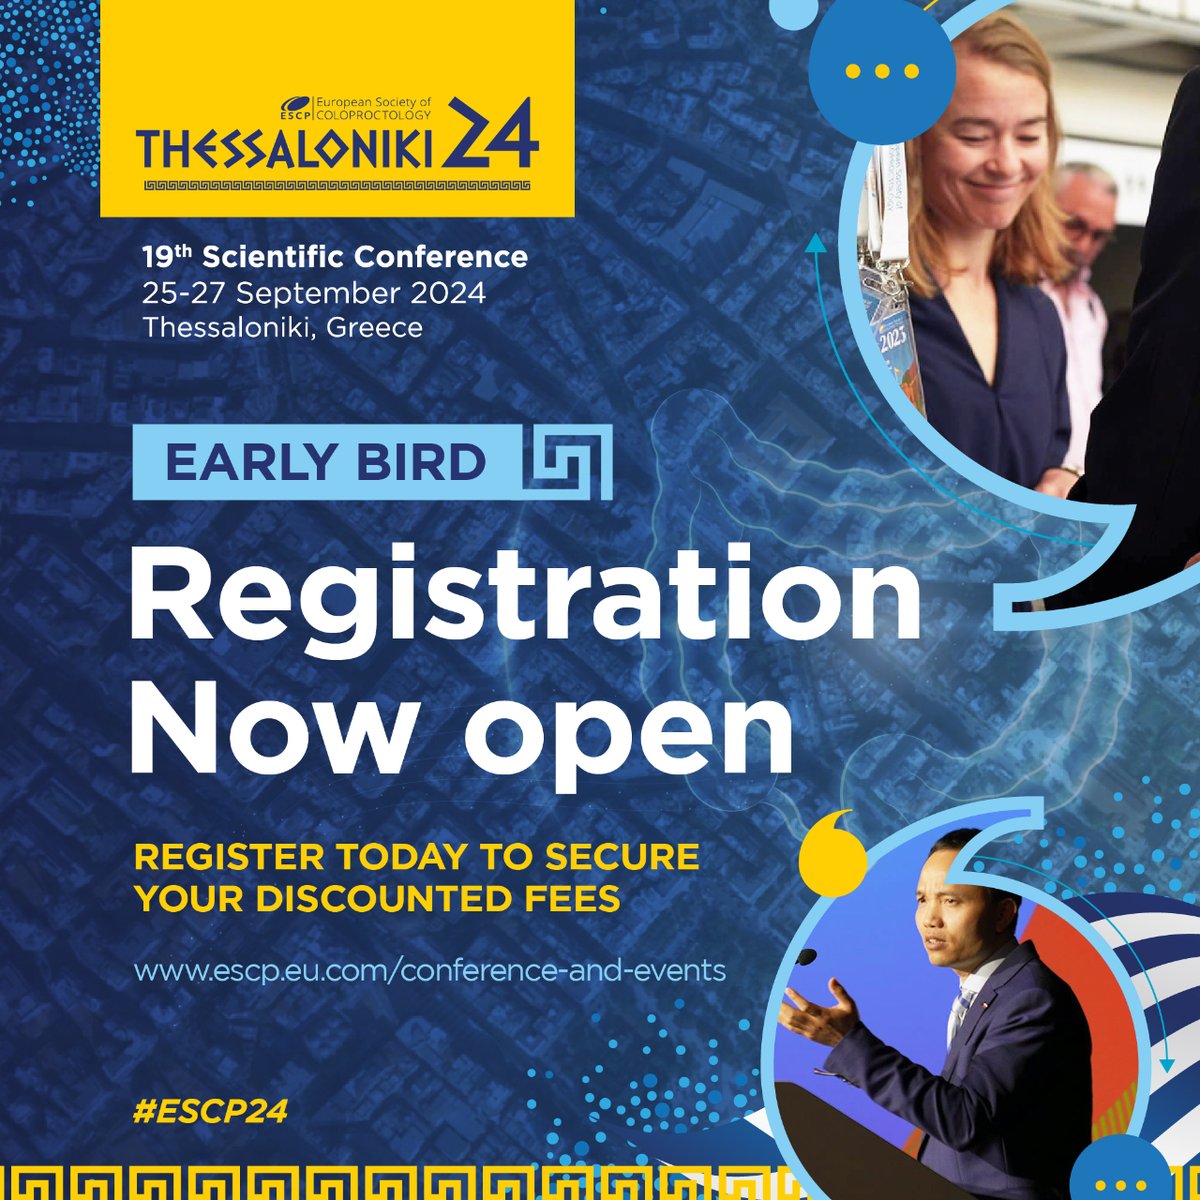 Remember registration for #ESCP24 is open! Connect with professionals who share your passion for #coloproctology and join us this September in Thessaloniki, Greece. Register now: i.mtr.cool/ffeswdarrc #ColorectalSurgery #ColorectalSurgeon